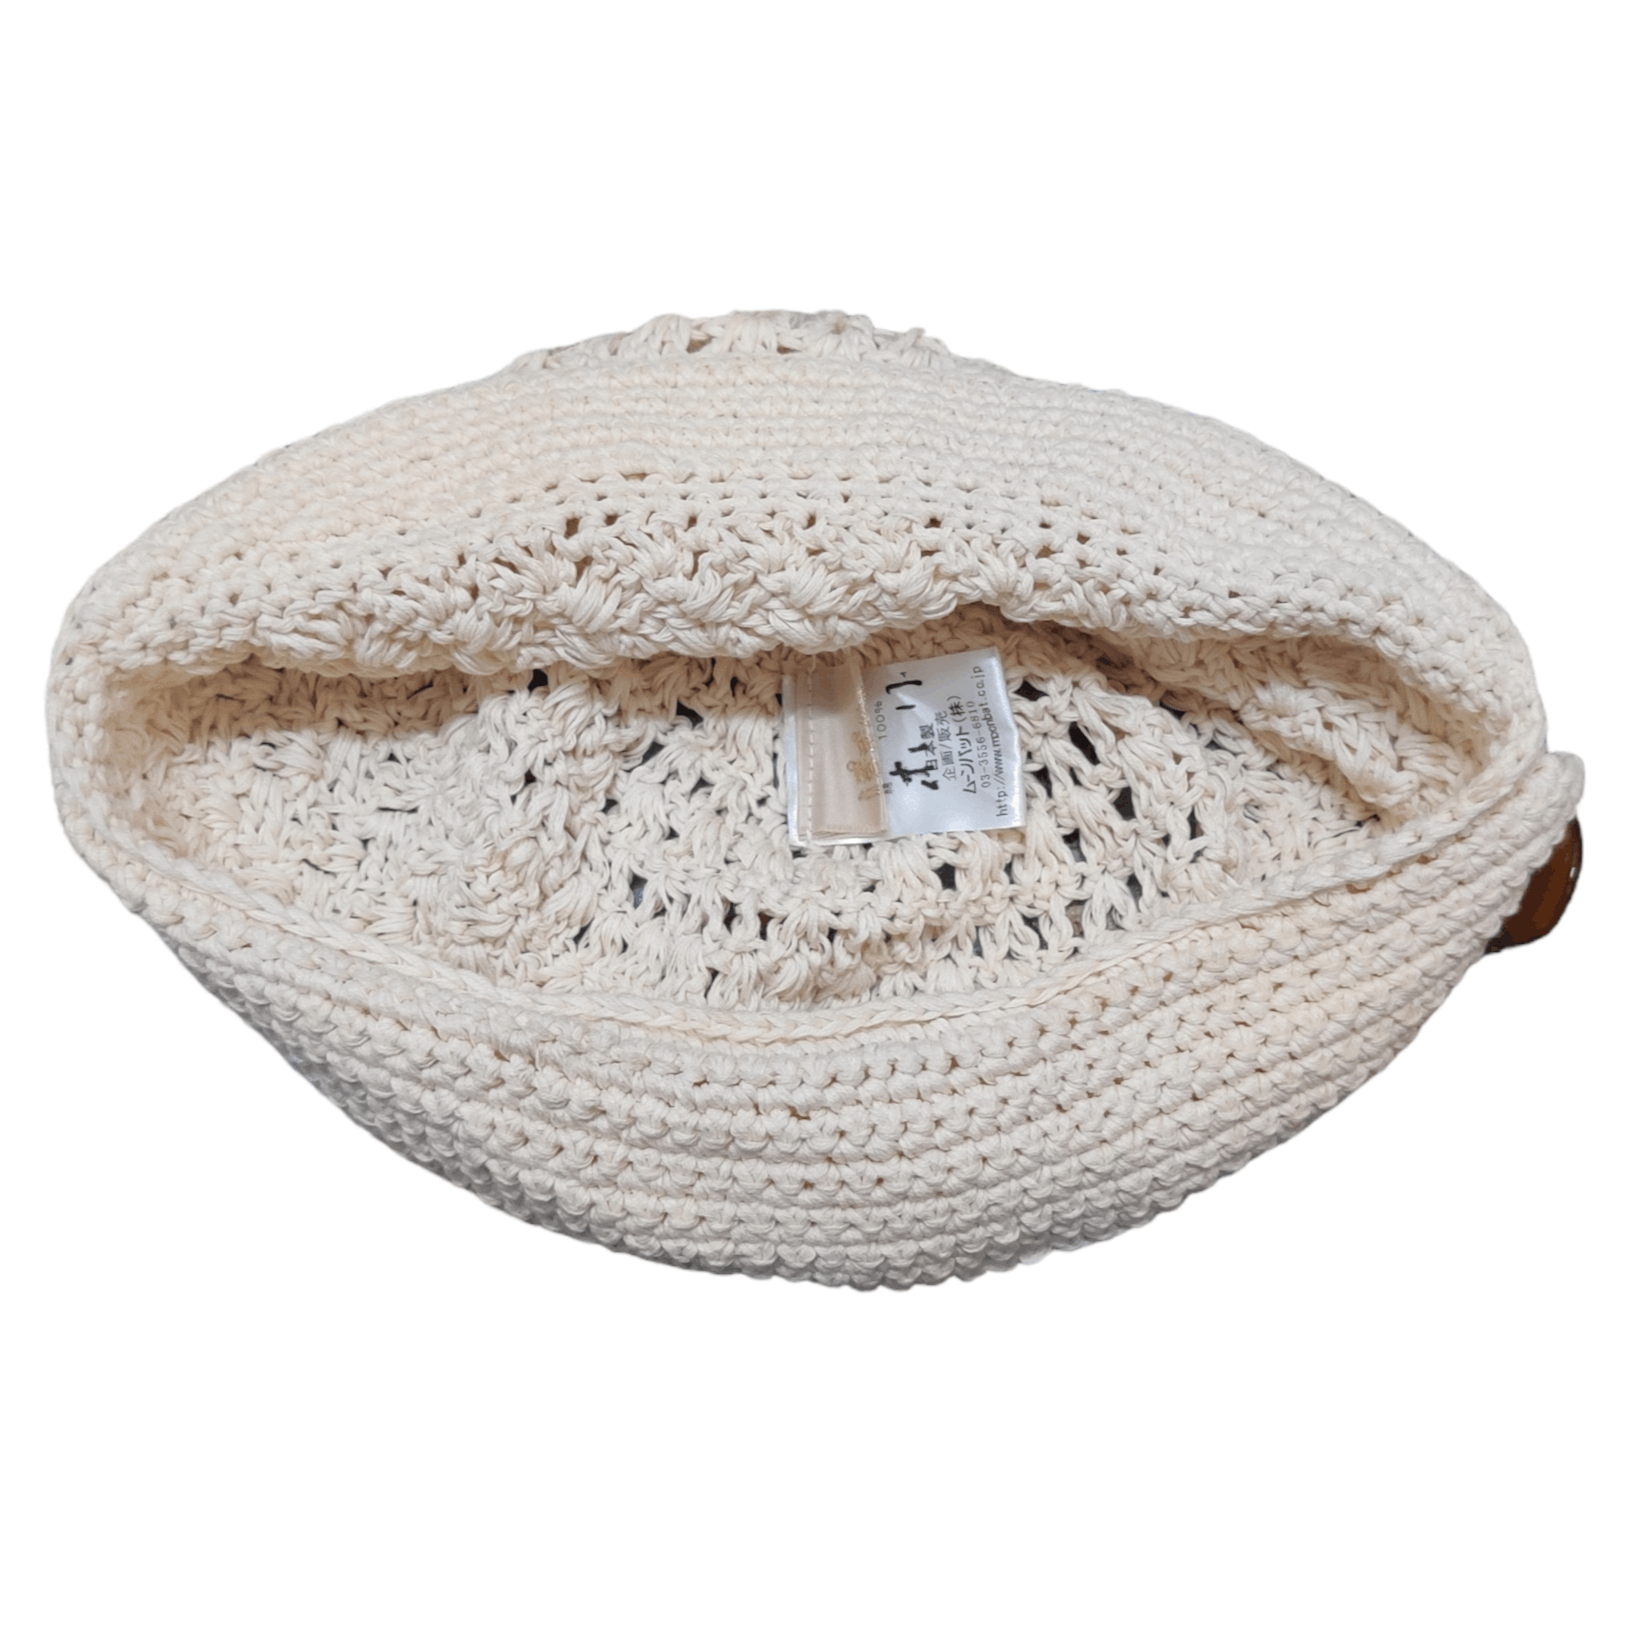 Vivienne Westwood Knitted Hat - 8